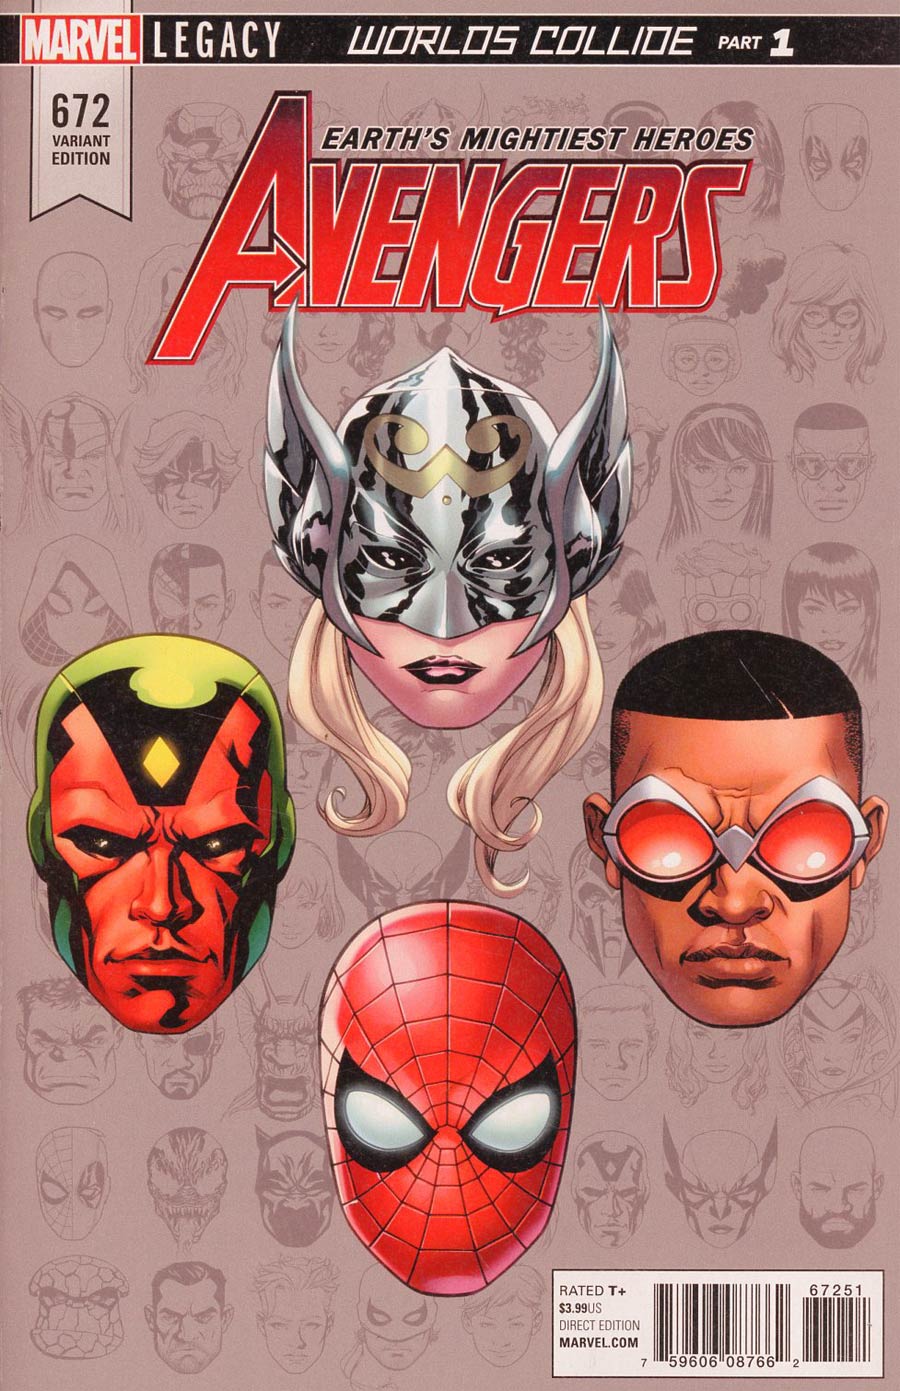 Avengers Vol 6 #672 Cover C Incentive Mike McKone Legacy Headshot Variant Cover (Worlds Collide Part 1)(Marvel Legacy Tie-In)